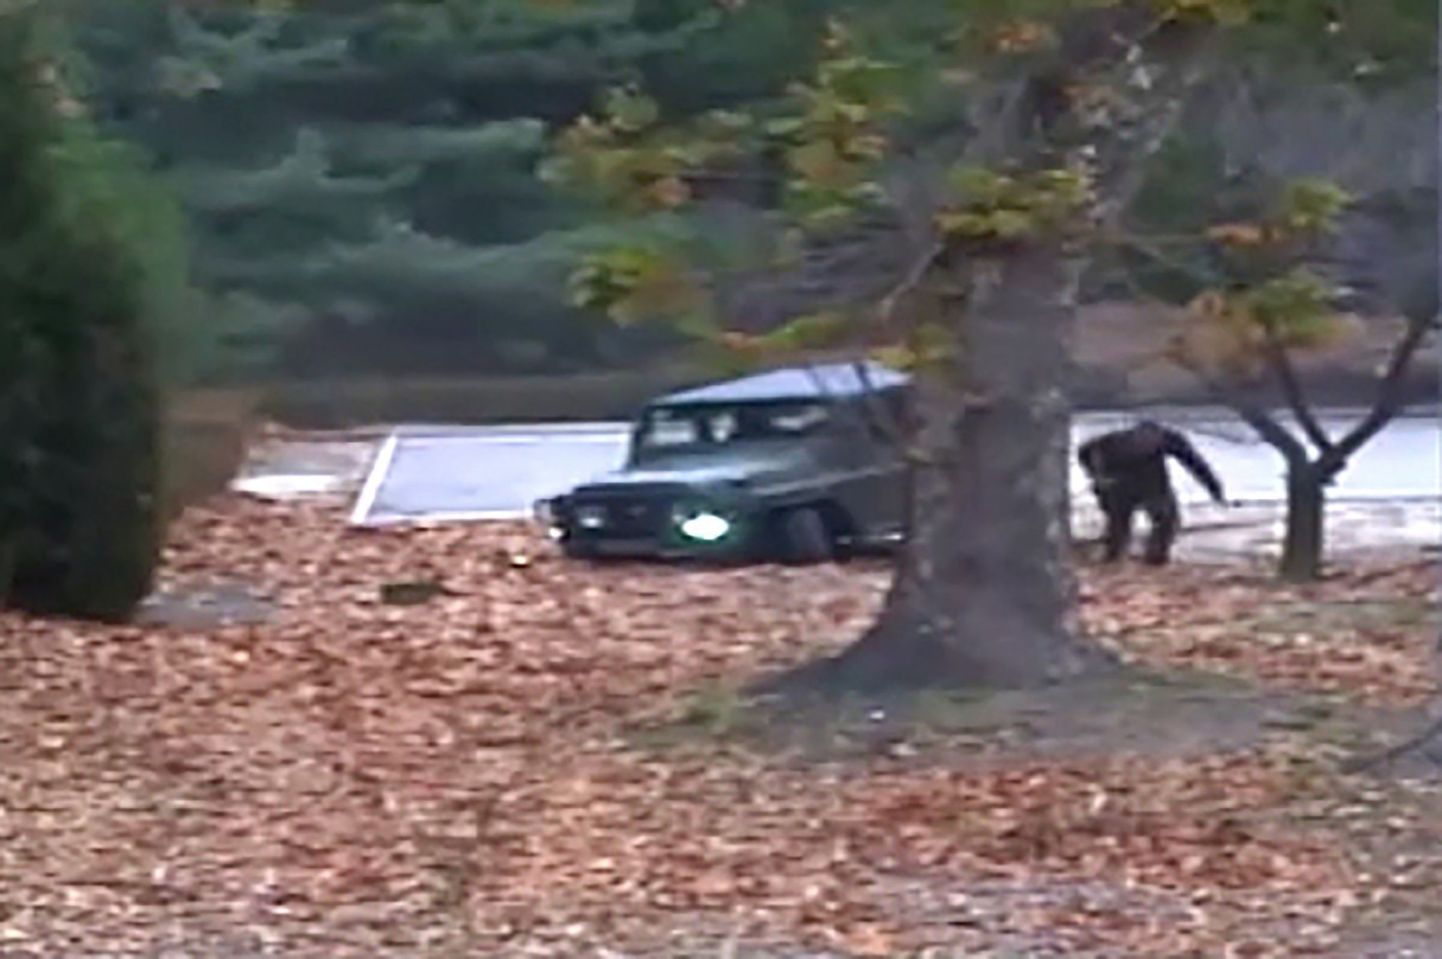 TOPSHOT - This screengrab made from video footage released by the United Nations Command on November 22, 2017 shows a North Korea defector running out from a vehicle at the Joint Security Area of the Demilitarized Zone (DMZ).
Dramatic footage of a North Korean soldier's defection released on November 22 showed him racing across the border under fire from former comrades, and then being hauled to safety by South Korean troops. The defector, who ran across the border at the Panmunjom truce village on November 13, was shot at least four times and has been recovering in a South Korean hospital. / AFP PHOTO / UNITED NATIONS COMMAND / Handout / RESTRICTED TO EDITORIAL USE - MANDATORY CREDIT "AFP PHOTO / UNITED NATIONS COMMAND (UNC)" - NO MARKETING NO ADVERTISING CAMPAIGNS - DISTRIBUTED AS A SERVICE TO CLIENTS